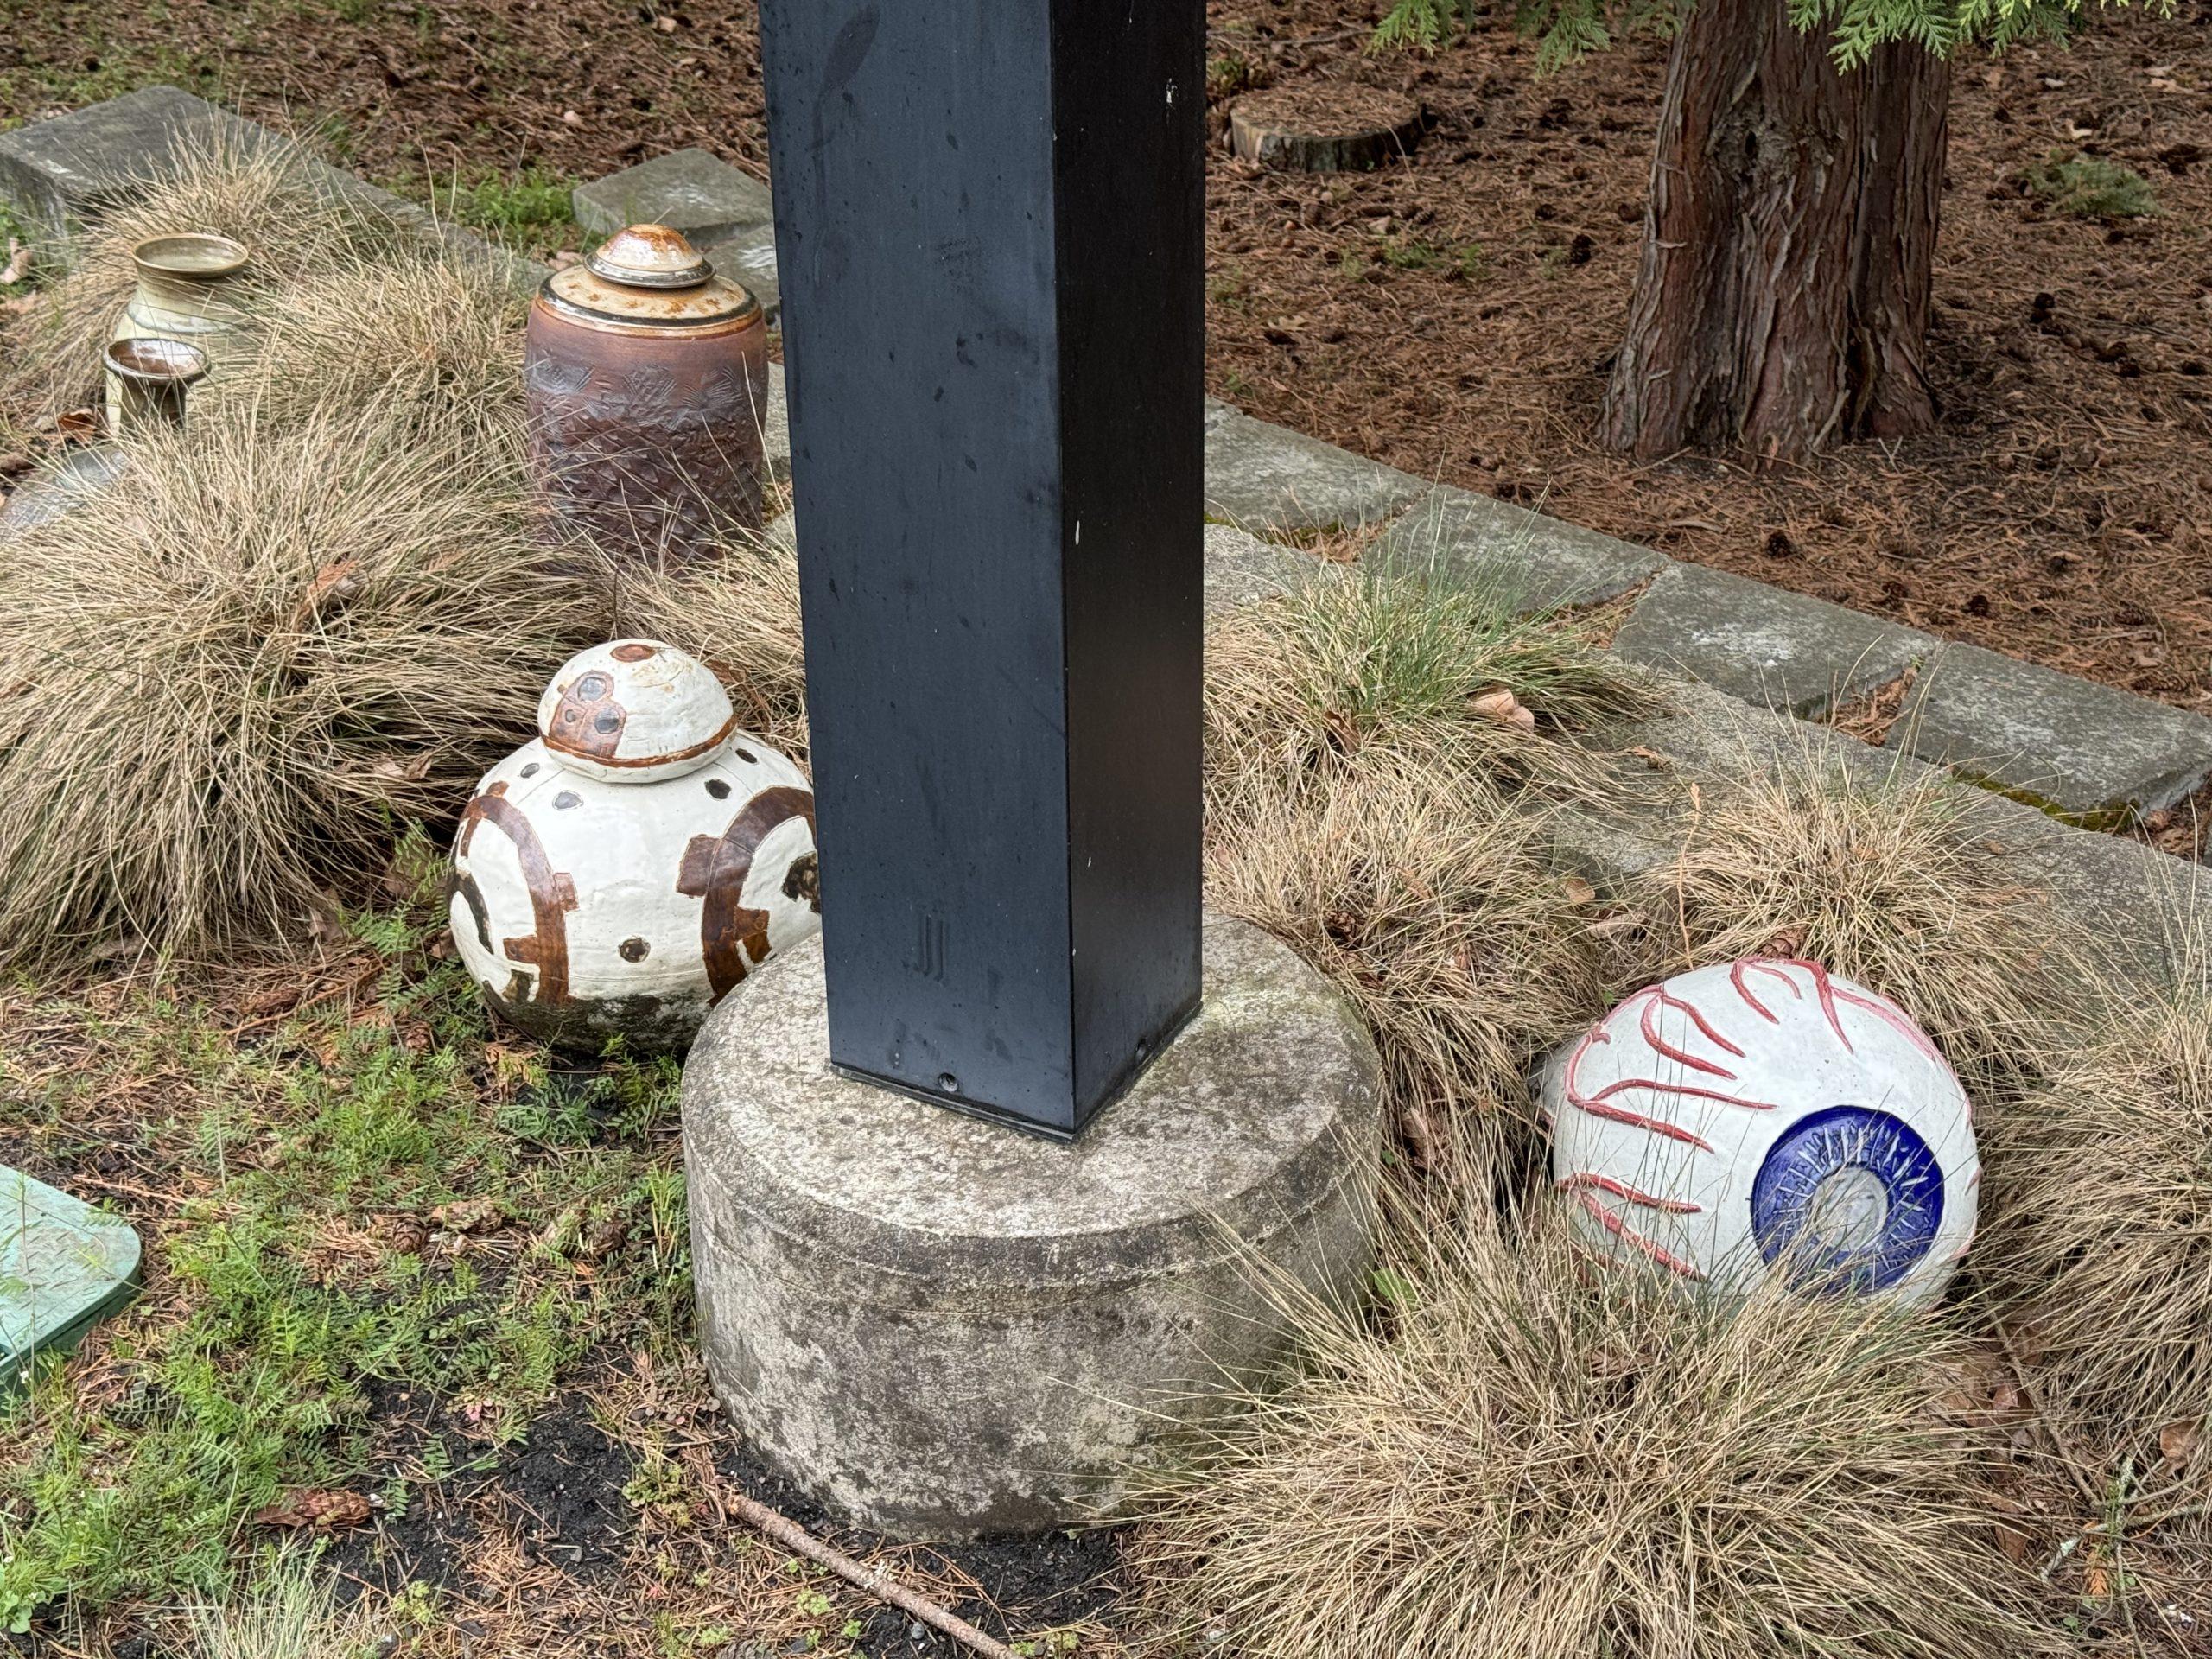 Pottery sculptures tucked into grasses near the base of a light pole. One looks like an eyeball, another like the BB-8 droid from Star Wars, with vases and urns behind them.